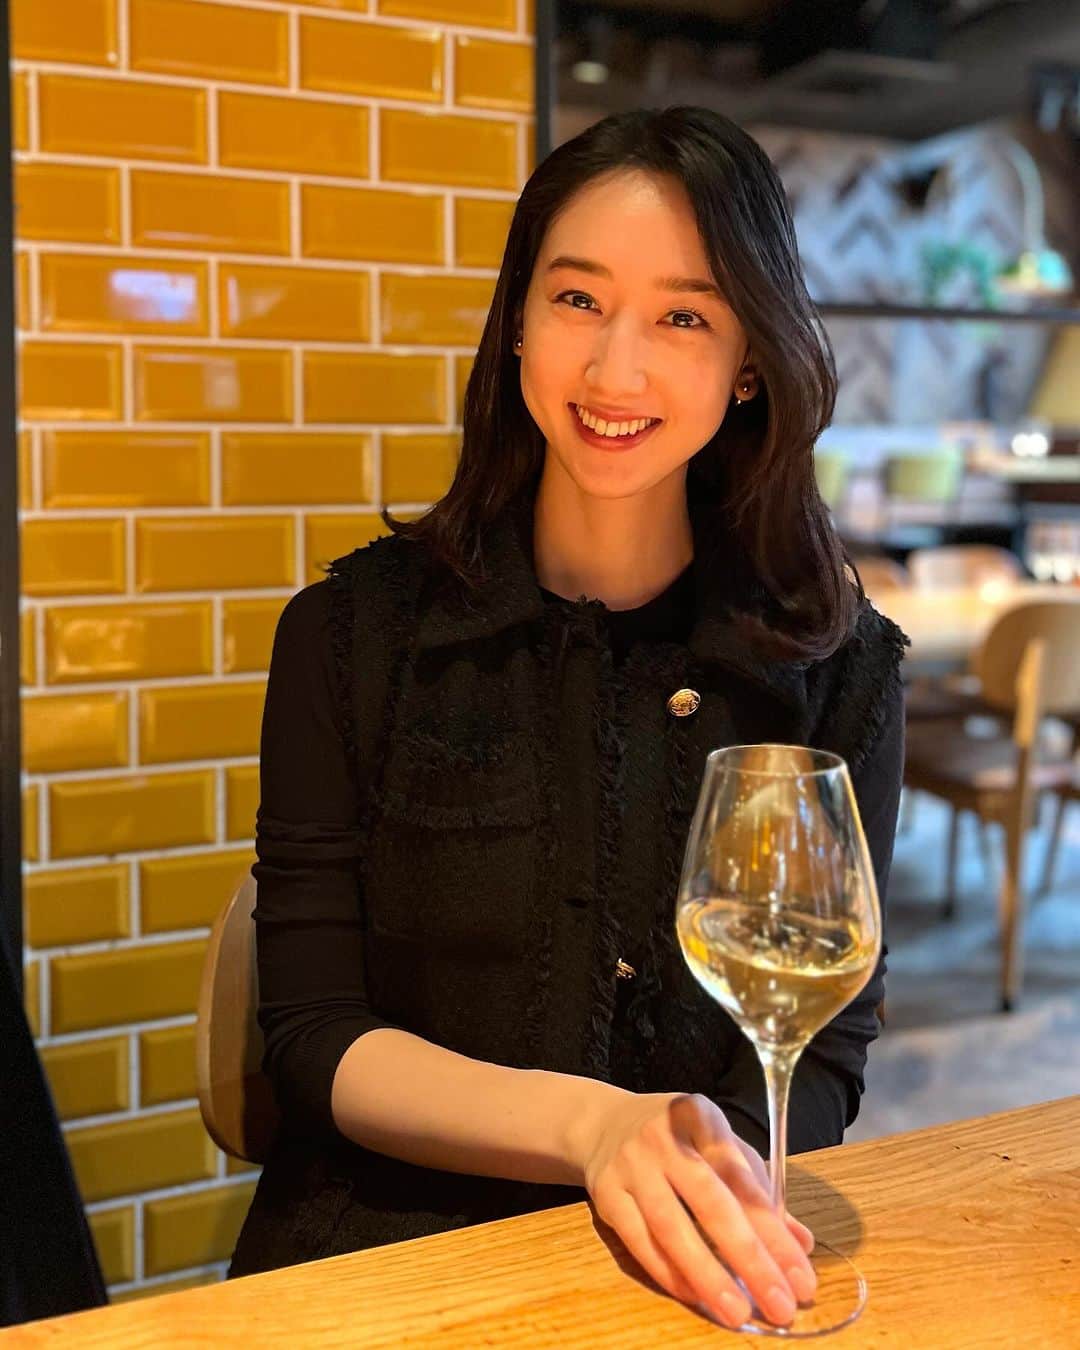 松原汐織さんのインスタグラム写真 - (松原汐織Instagram)「I’ve been in Amsterdam for 2 months. I found the best restaurant in Amsterdam for my family at the moment🍴 @pesca.restaurant doesn’t have a menu. We choose and discuss how to cook at the fish market🐟 My husband and I ordered Oysters, Calamari and grilled Seabass. Everything was perfect!! Also, there is a nappy-changing seat and baby chairs. Its staff is gentle. It’s an amazing Baby-friendly restaurant👏🏻 I recommend there to every family💕💕 ・ ・ アムステルダムに住んで、2ヶ月が経過🇳🇱 現時点で、我が家のNo. 1レストランを紹介します♡  オランダは意外にも魚介類が美味しいんです😋(オランダ産ハマチ、なんてものも) PESCAはメニューが無く、並んでいる魚介類の中から、素材と調理法を決めます。オーダーした、生牡蠣＆カラマリ＆スズキのグリルはどれも美味しくて完璧◎ そして、オムツ替えシートとキッズチェアがあるのも有り難い！！  料理が美味しい×ベビーフレンドリー×オシャレ＝最高！🙌🏻 ヨーロッパ旅行中は肉食になりがちだと思うので、旅行客の方にも♡ 全子連れ家族にオススメしたいお店です👶🏻💕  余談ですが、ジレのインナーにロンTとして着ているのはUNIQLOのリブ素材の極暖。進化していてビックリ〜極暖に感激してます🤭笑 ・ ・ ー #baby #babygirl #9monthsold #mumofagirl #lovemyfam #netherlands #amsterdam  #pesca #lekker  #オランダ #オランダ生活 #オランダグルメ  #アムステルダム #アムステルダム生活  #アムステルダム子育て #オランダ子育て #子連れアムステルダム #オランダグルメ  #ヨーロッパ #ヨーロッパ在住 #ヨーロッパ子育て #海外子育て #海外子育てママ #令和5年ベビー #女の子ママ  #shioriinnetherlands2023」11月27日 20時50分 - shiori_ma_